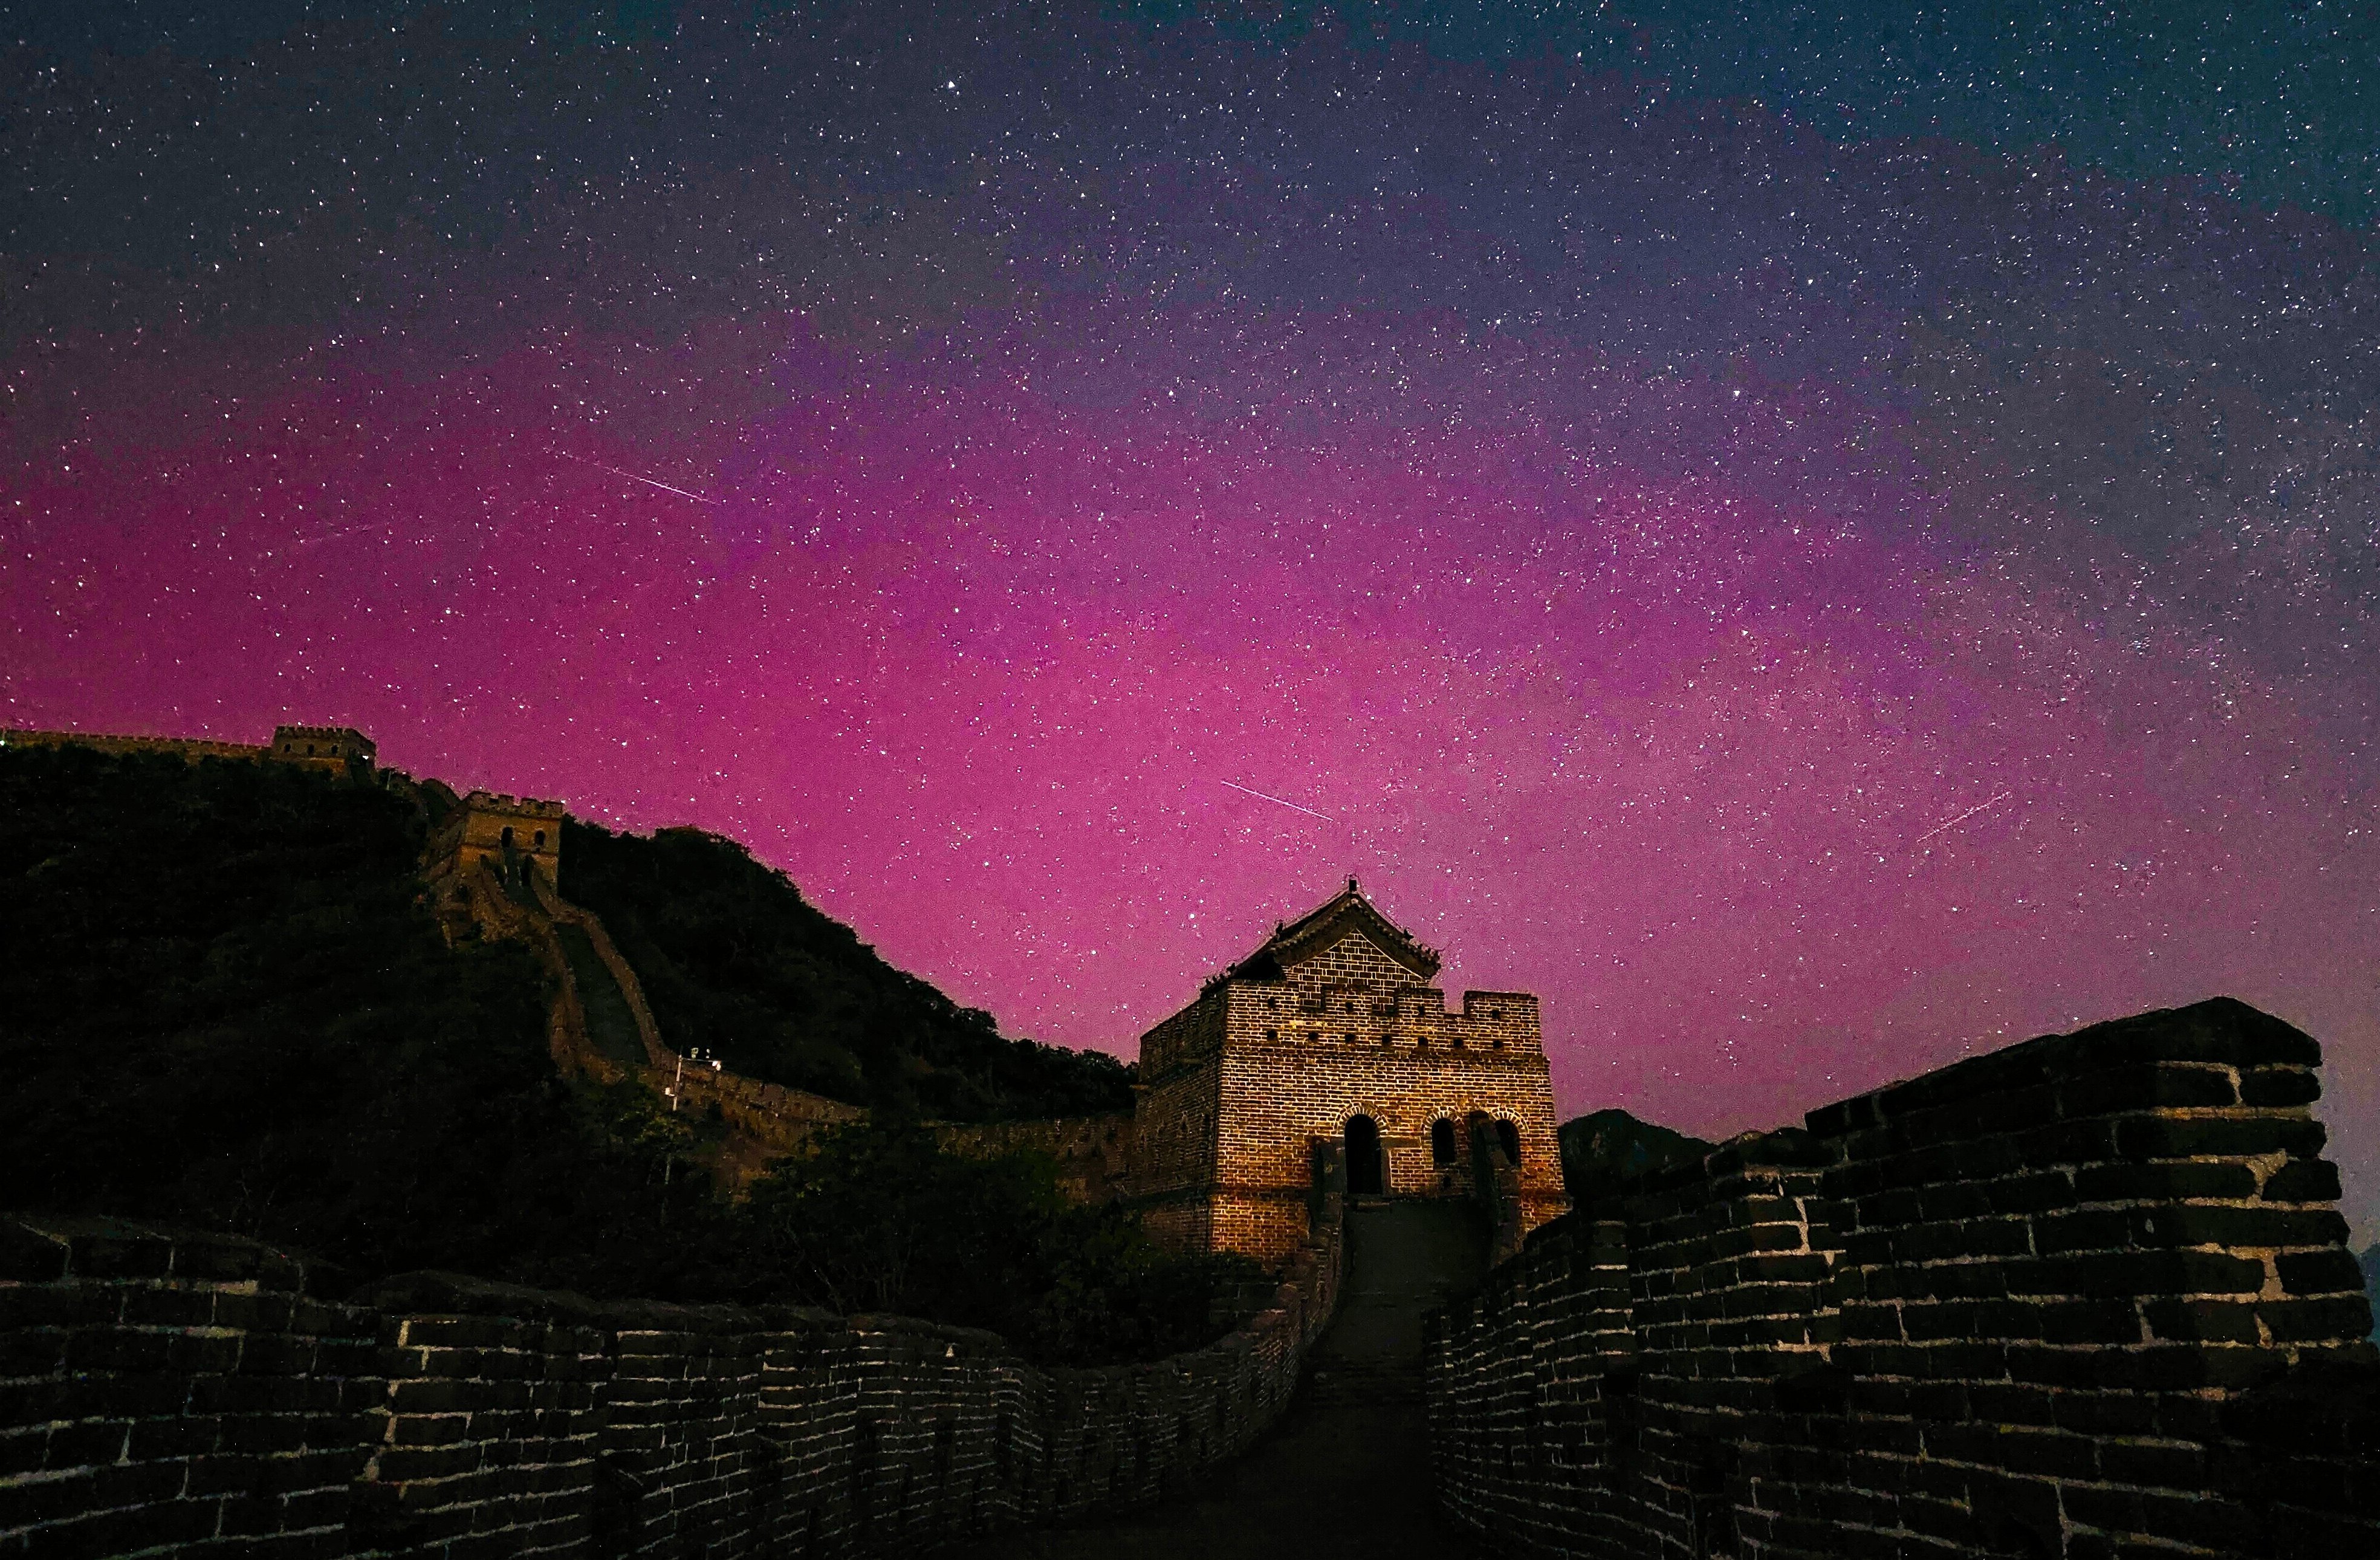 The skies above the Great Wall were lit up on Saturday night. Photo: Weibo/ 摄影师钟大猫